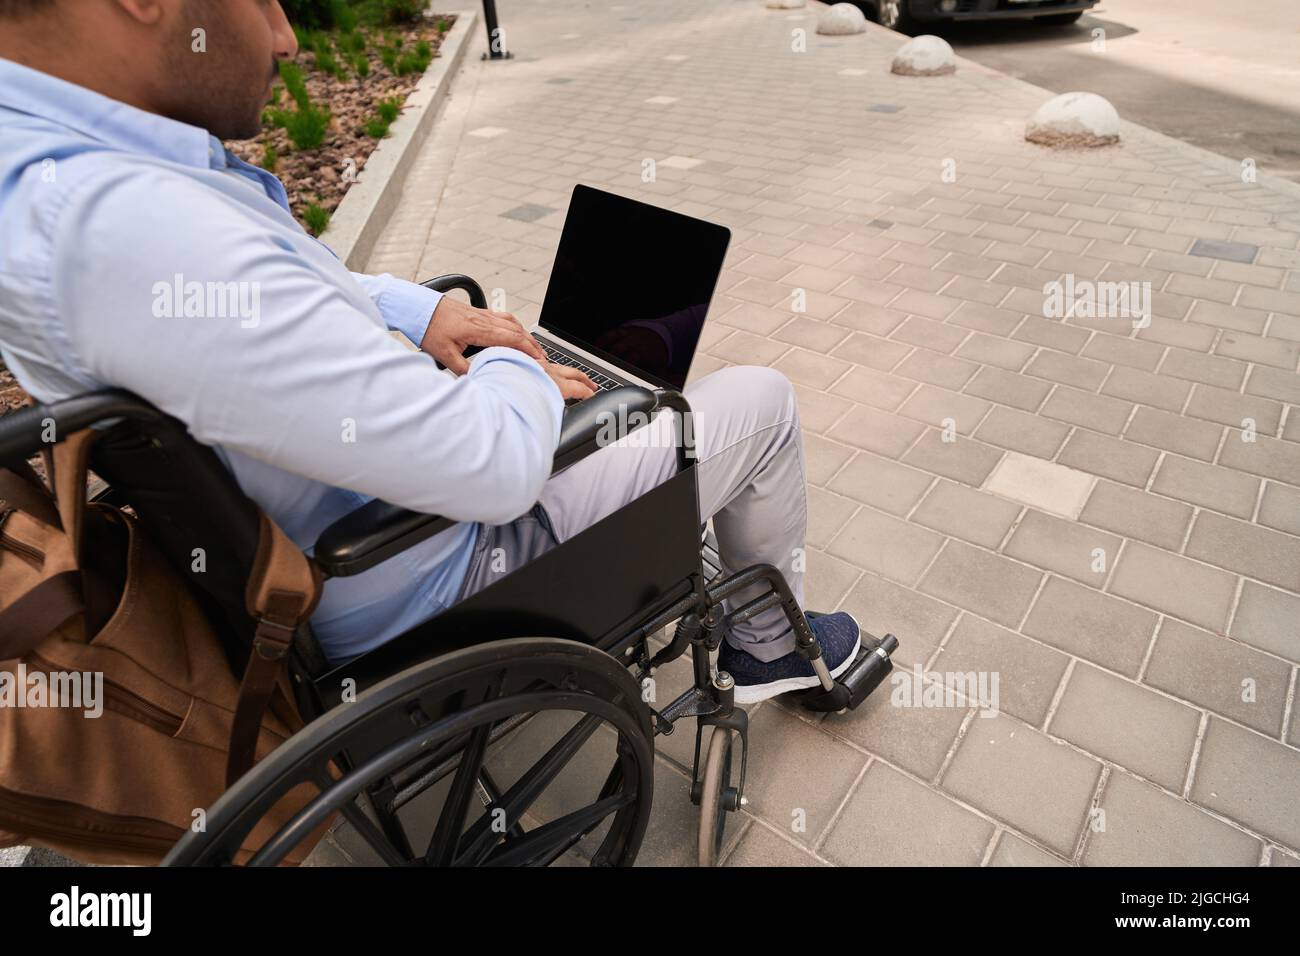 Man with disability using portable computer outdoors Stock Photo